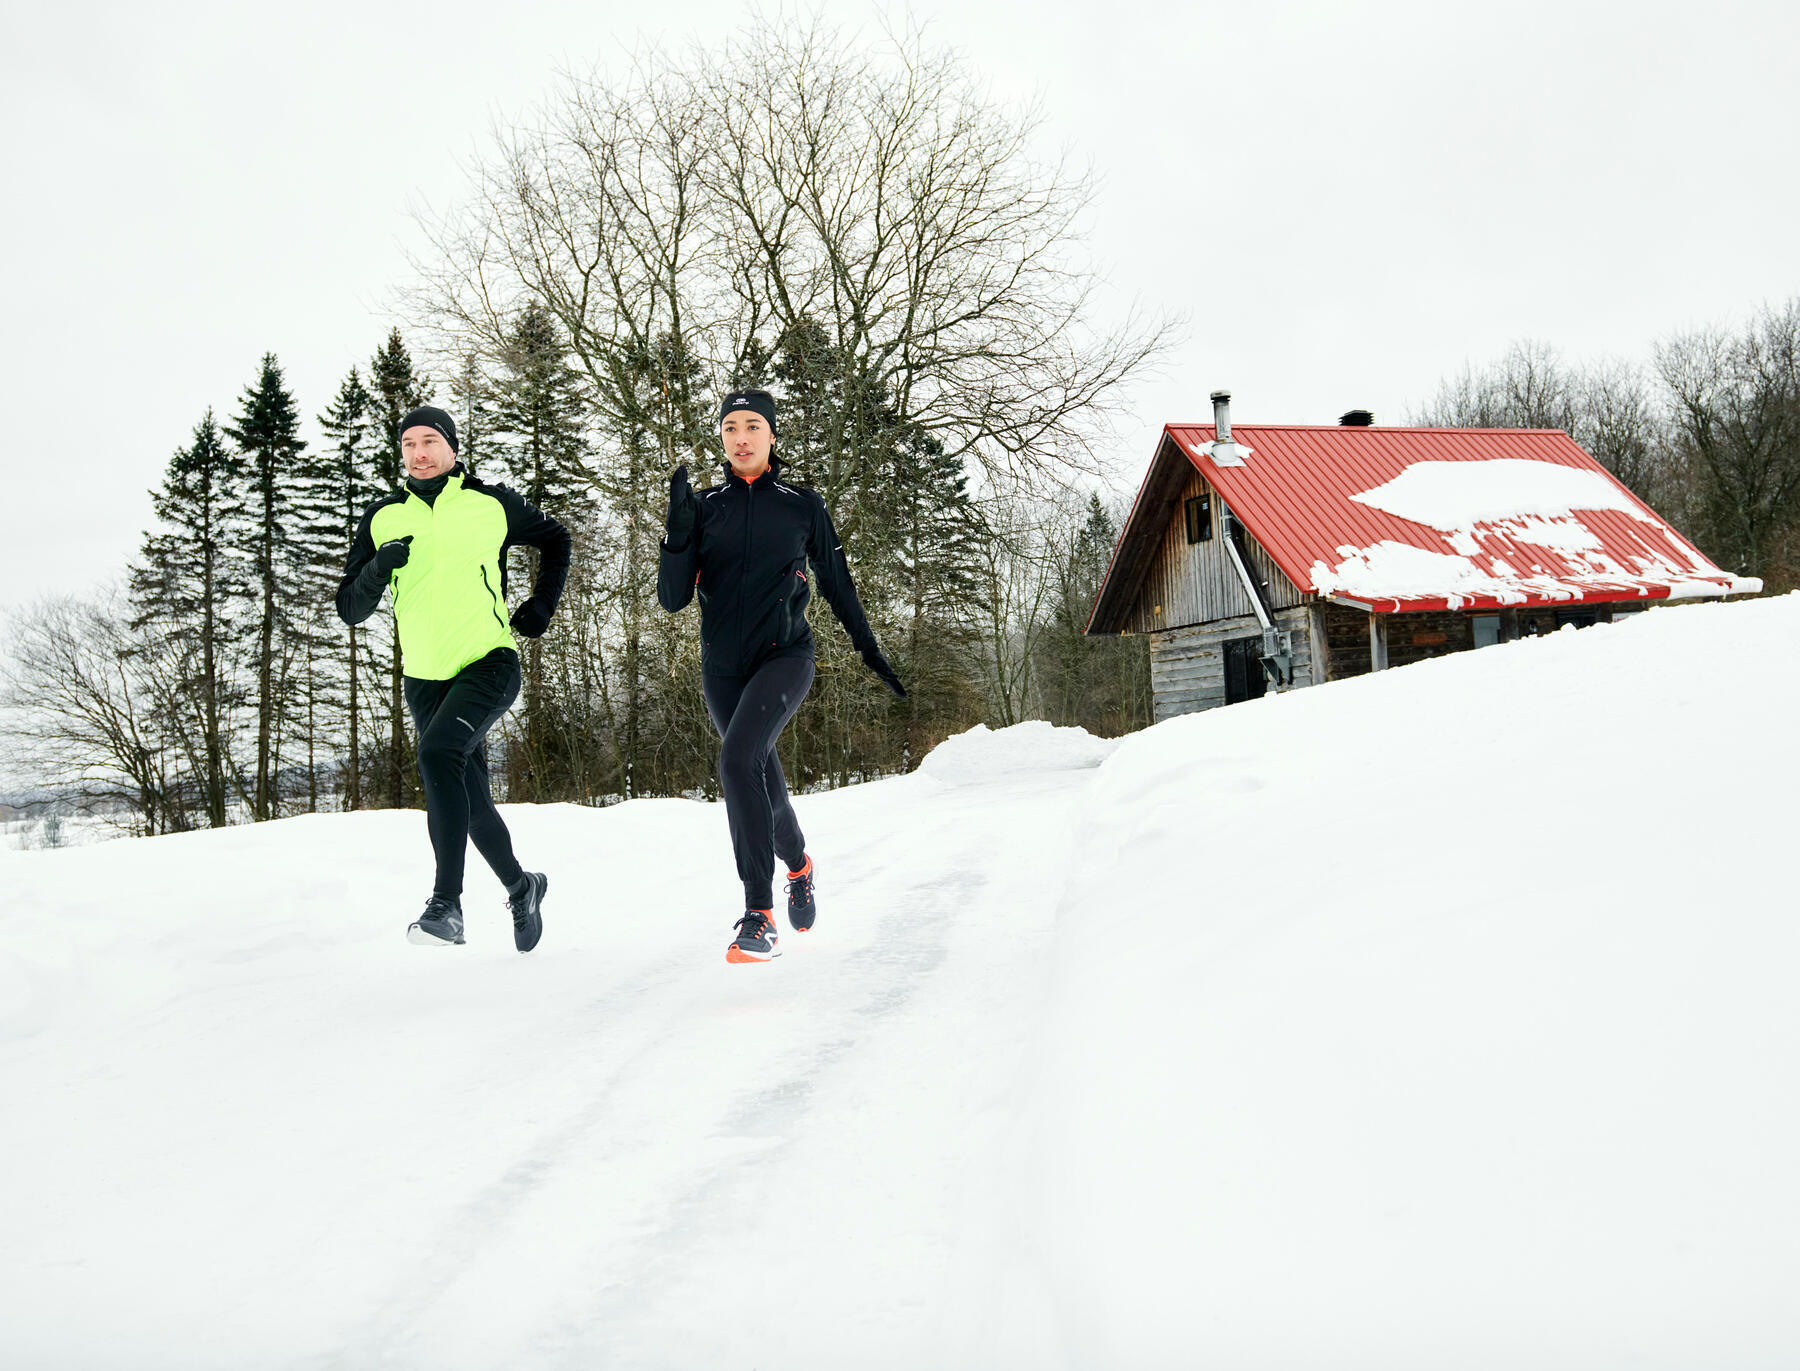 Winter Running Tips From the Pros